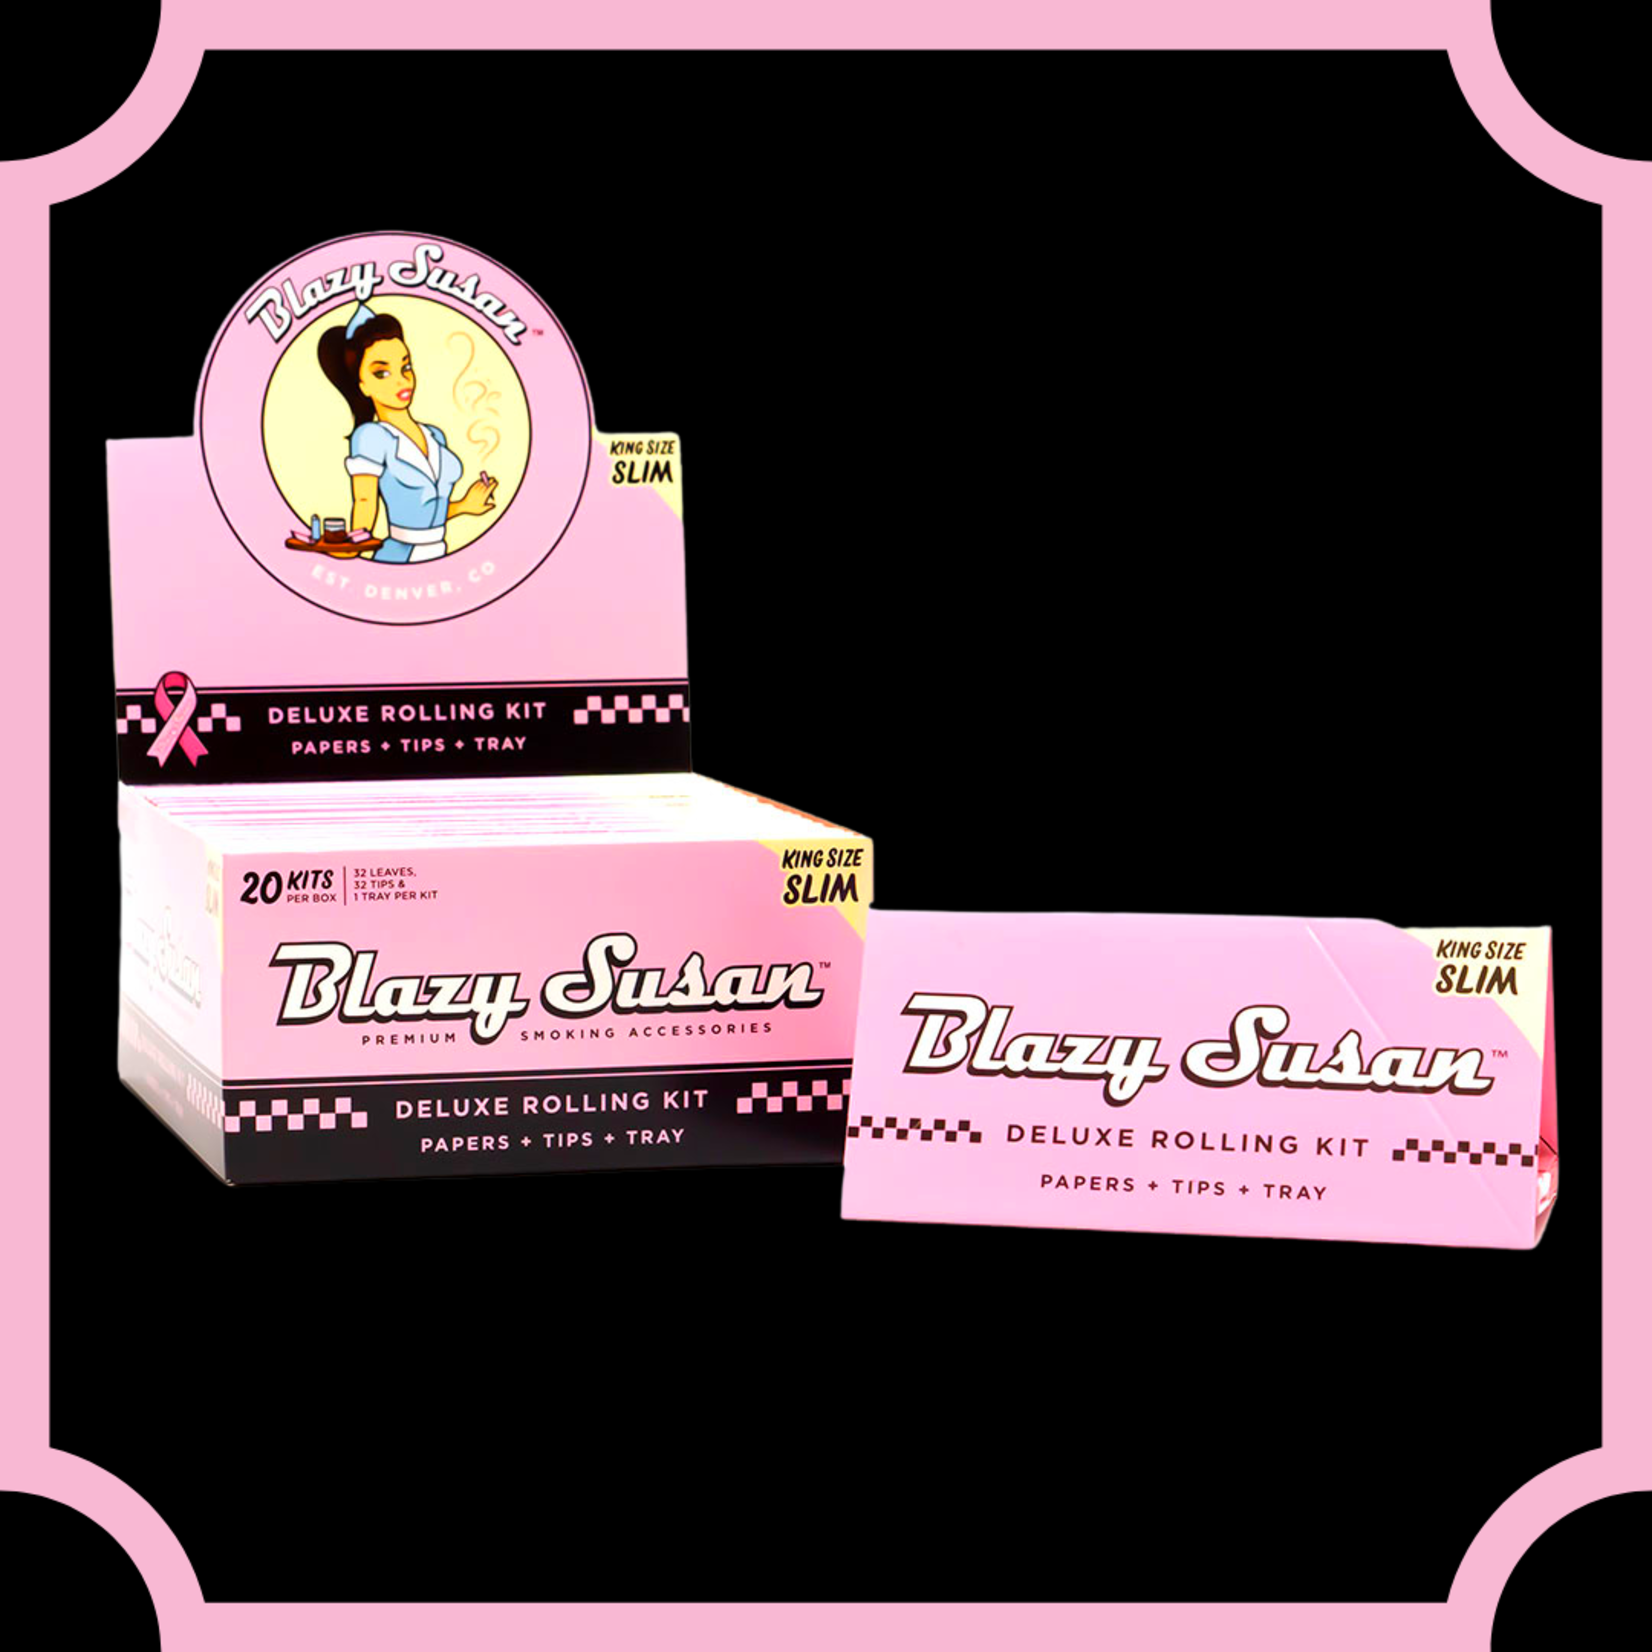 Blazy Susan Blazy Susan Deluxe Rolling Kit: Papers + Tips + Tray - King Size Slim